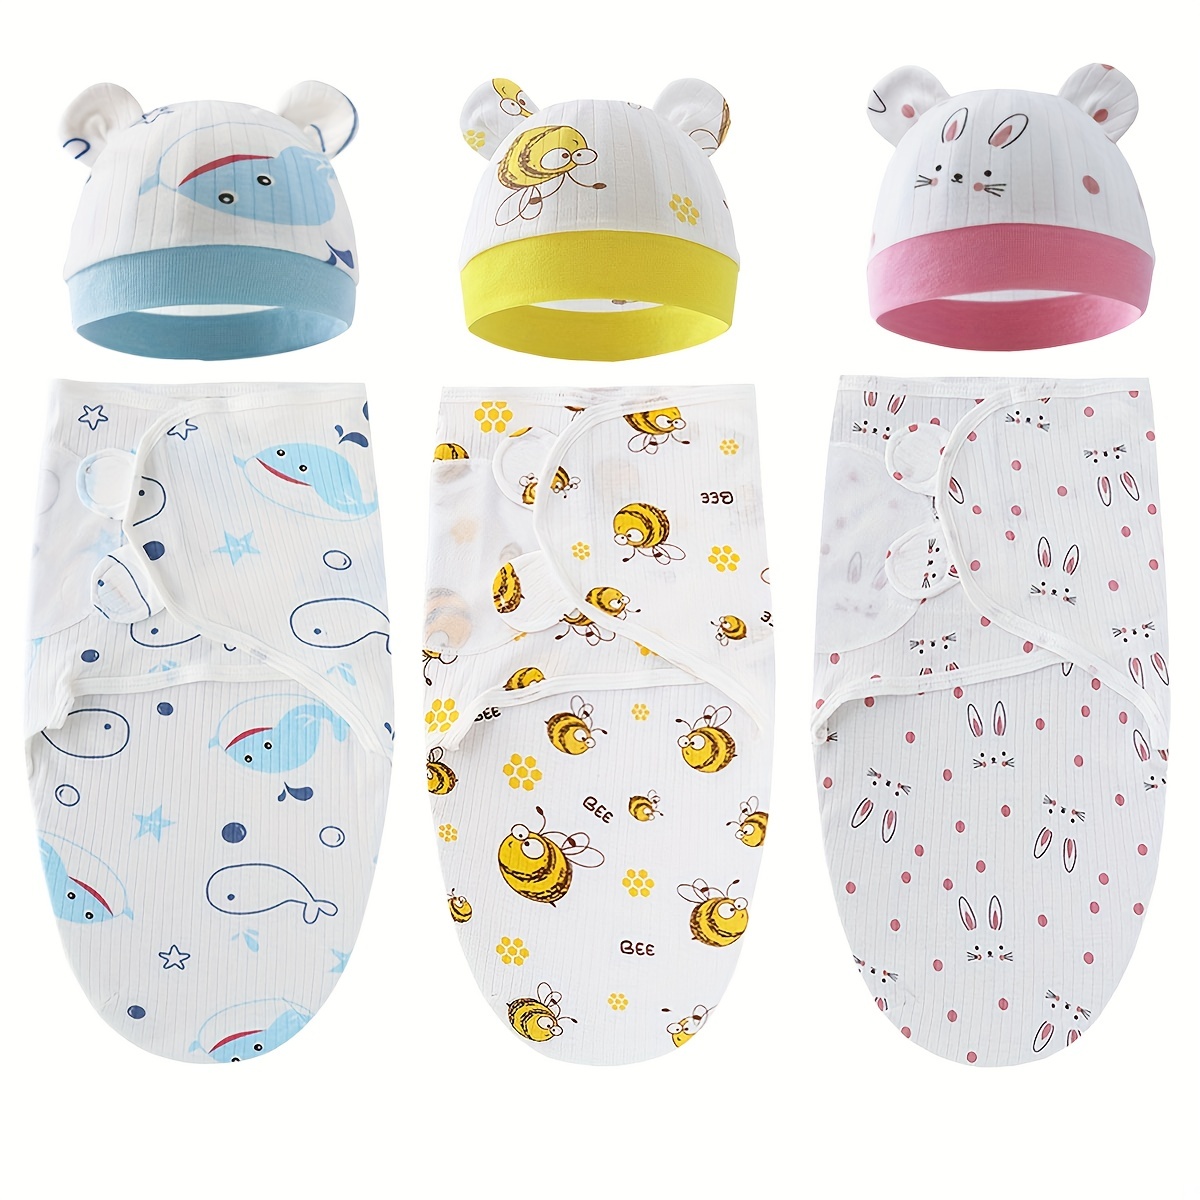 

The Perfect 1 Set Swaddle For 0-6 Months Old Babies - Adjustable, Comfortable & Safe Sleeping Bag For Boys & Girls!